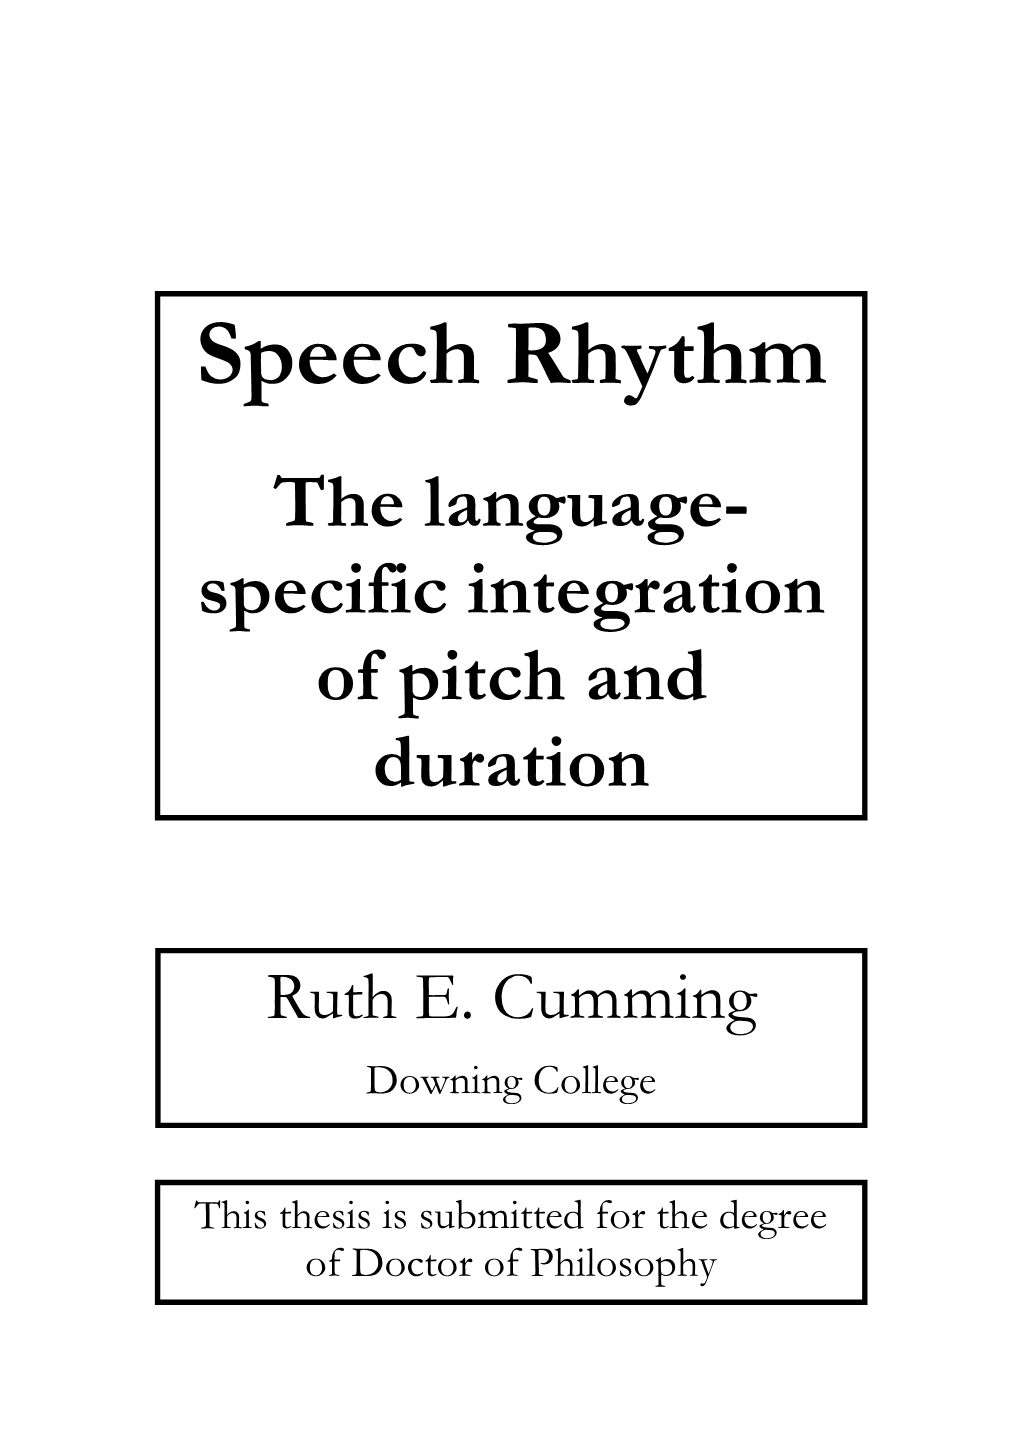 Speech Rhythm the Language- Specific Integration of Pitch and Duration